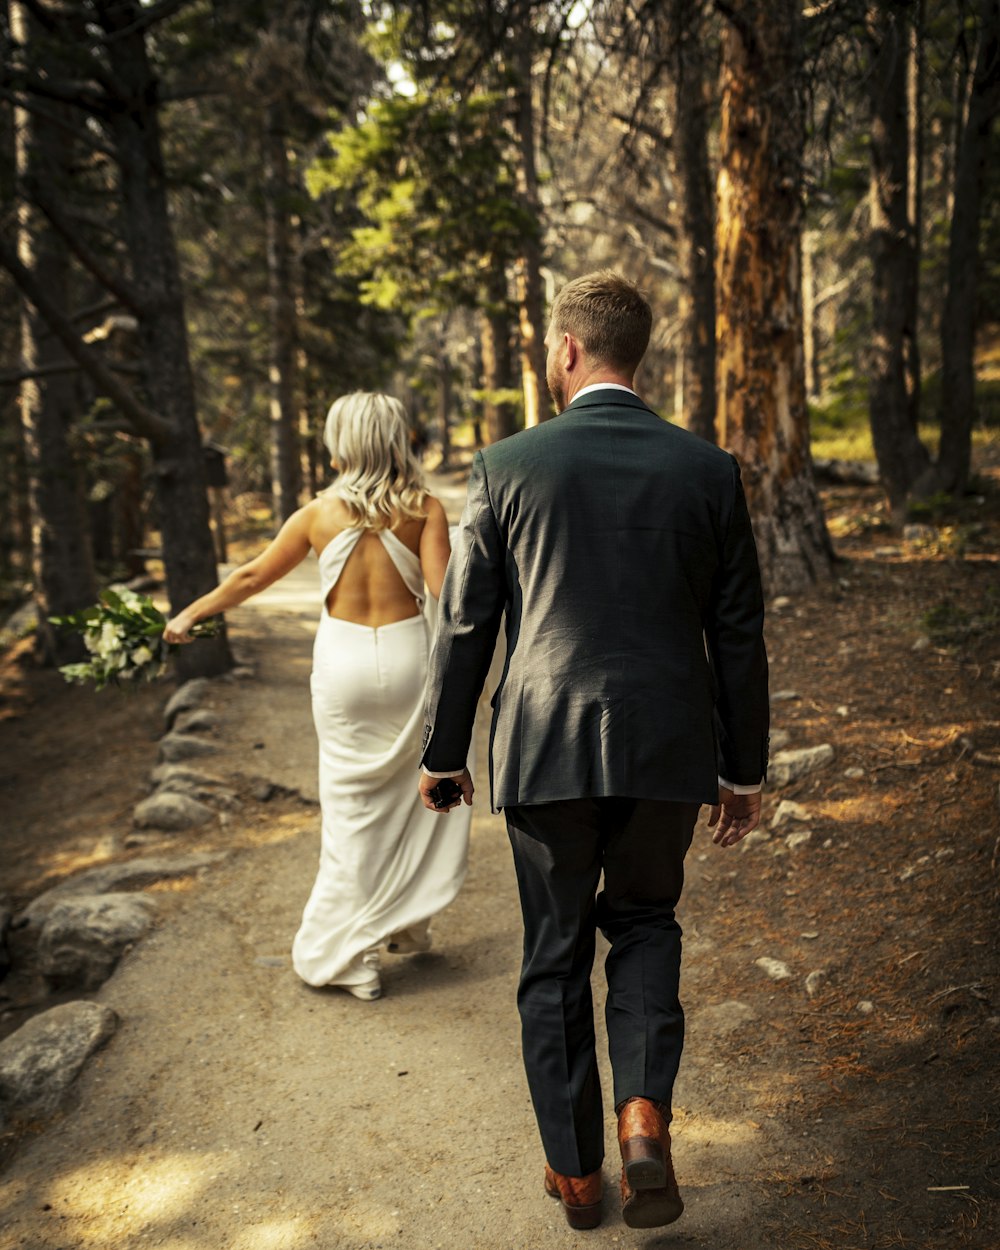 man in black suit jacket and woman in white dress walking on pathway during daytime